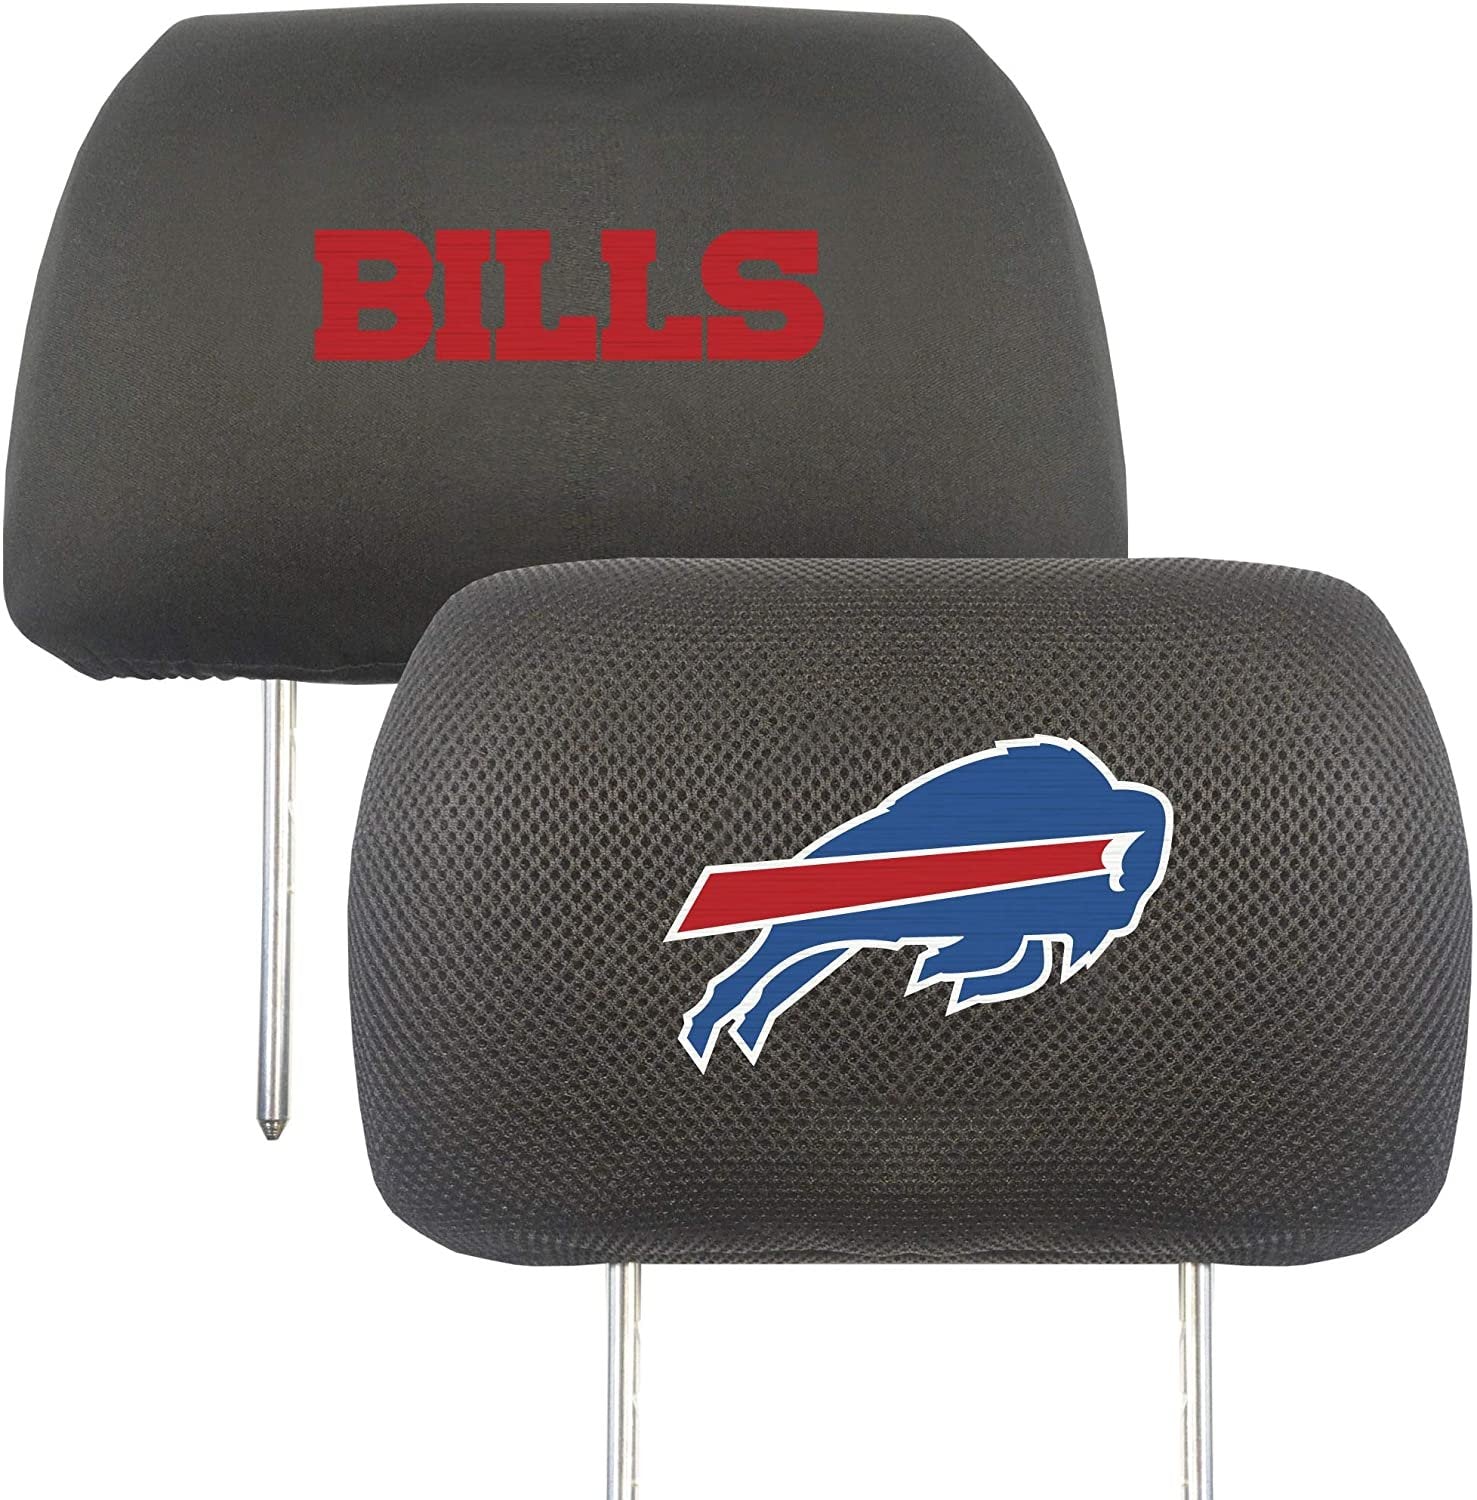 Buffalo Bills Pair of Premium Auto Head Rest Covers, Embroidered, Black Elastic, 14x10 Inch